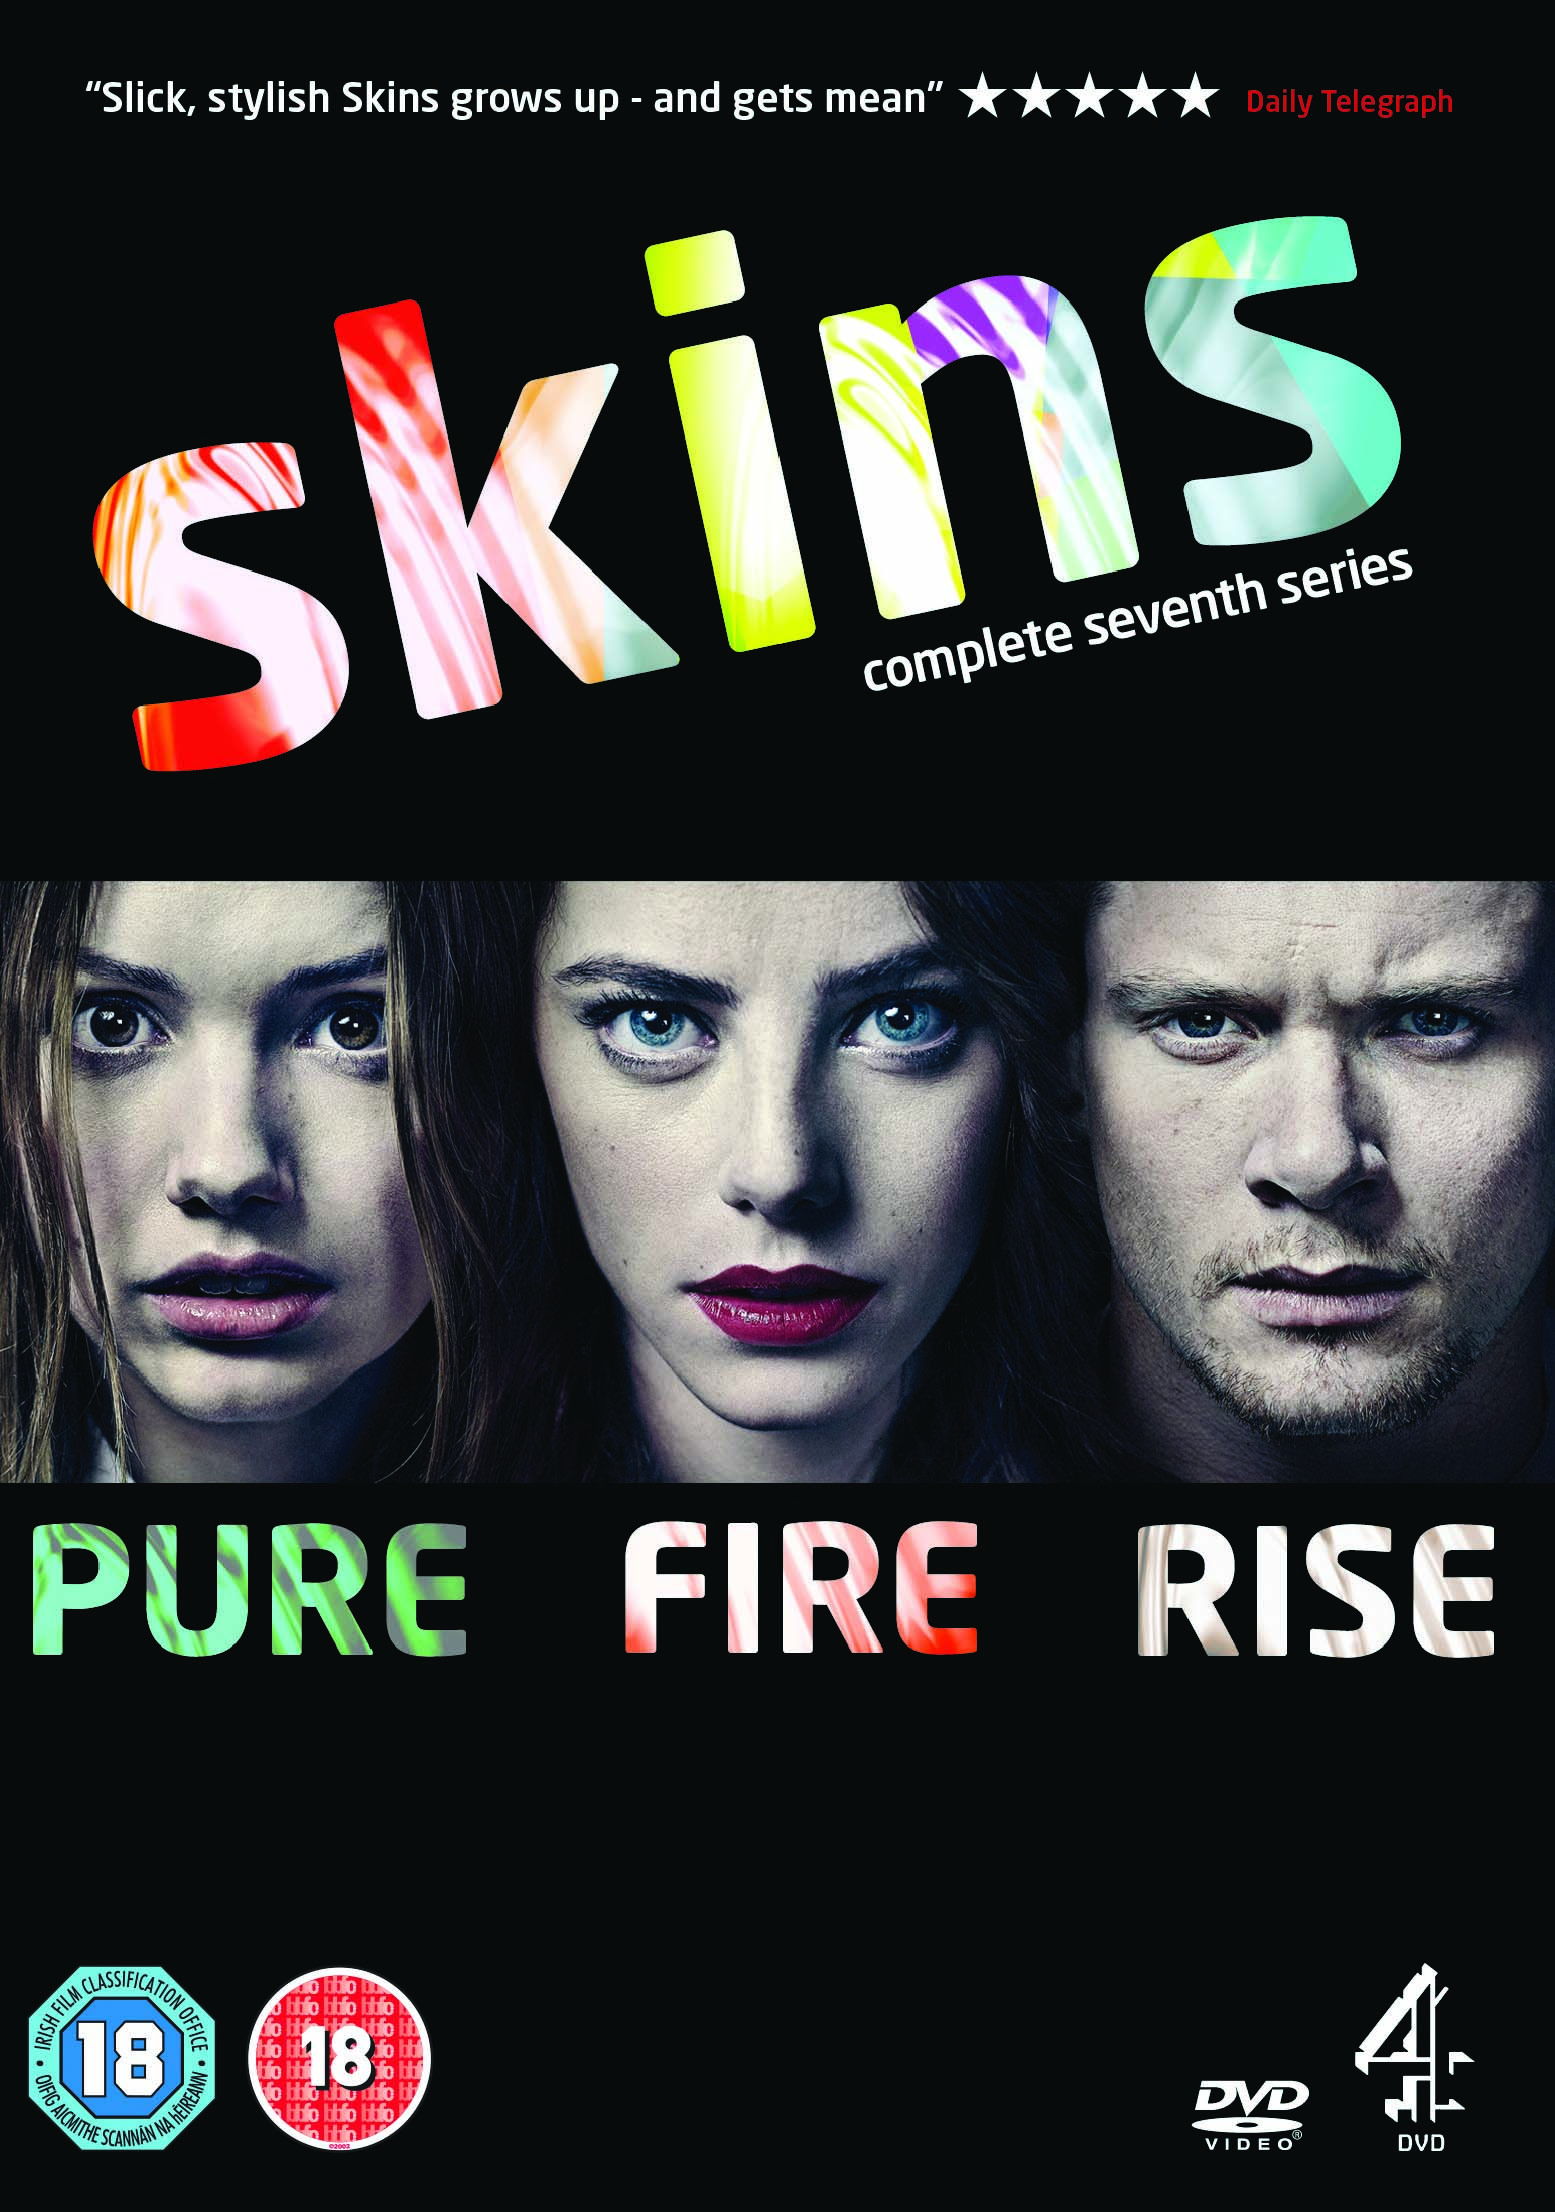 Skins S7 DVD Review